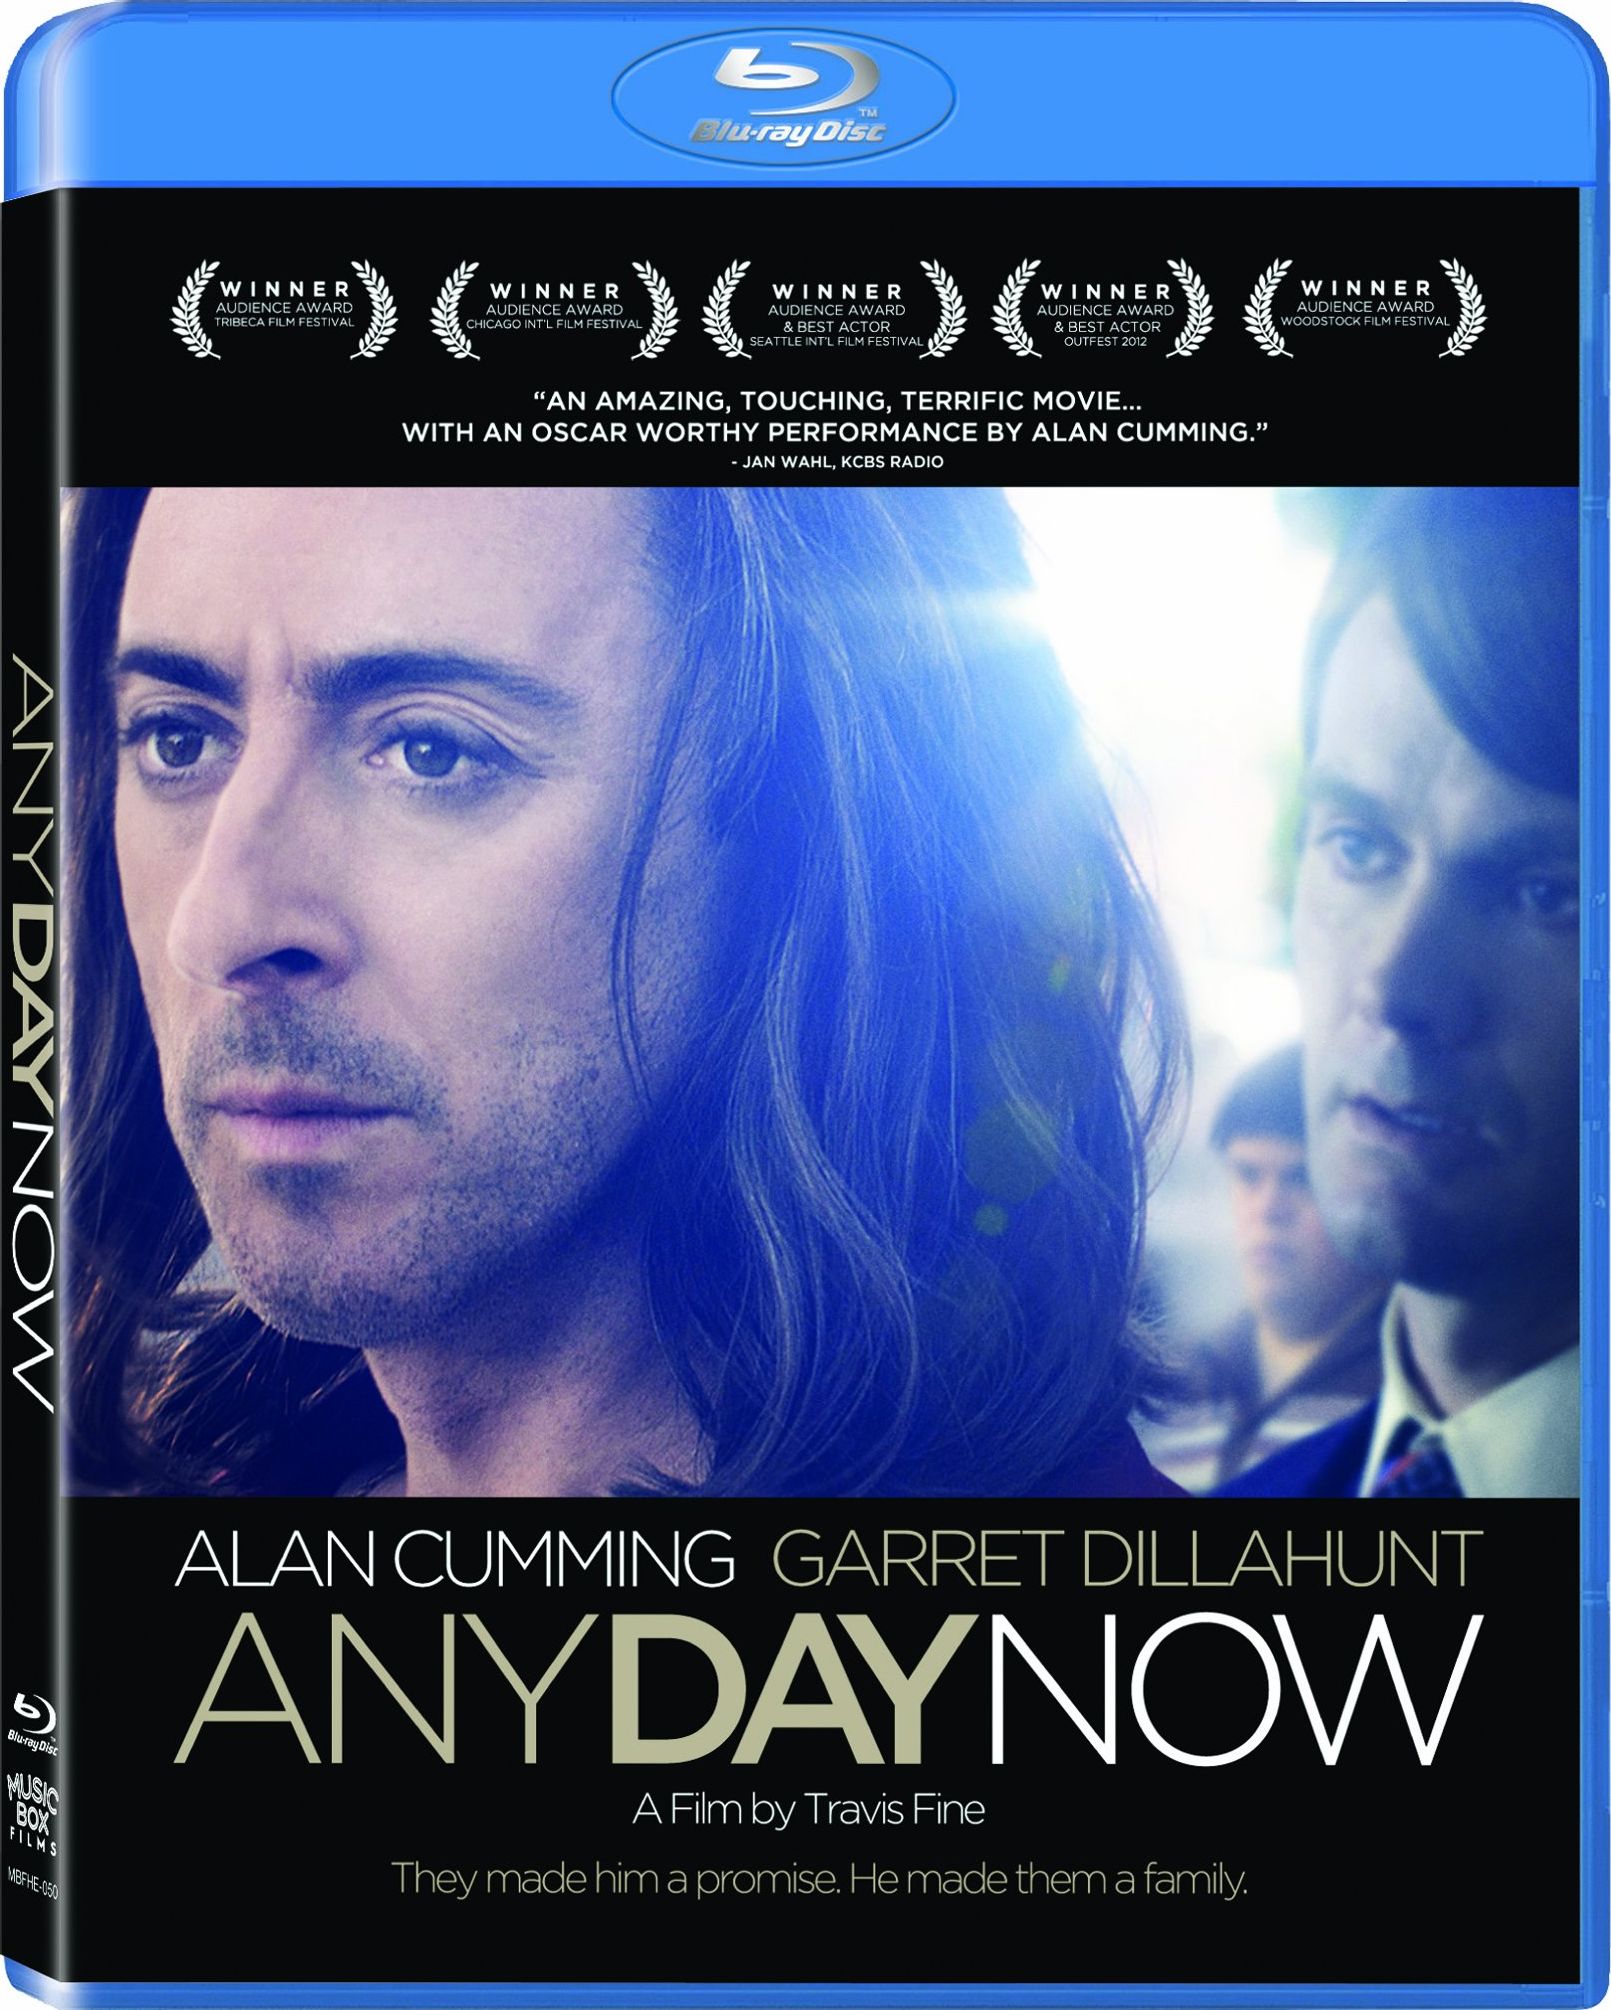 Any Day Now DVD Release Date April 23, 2013